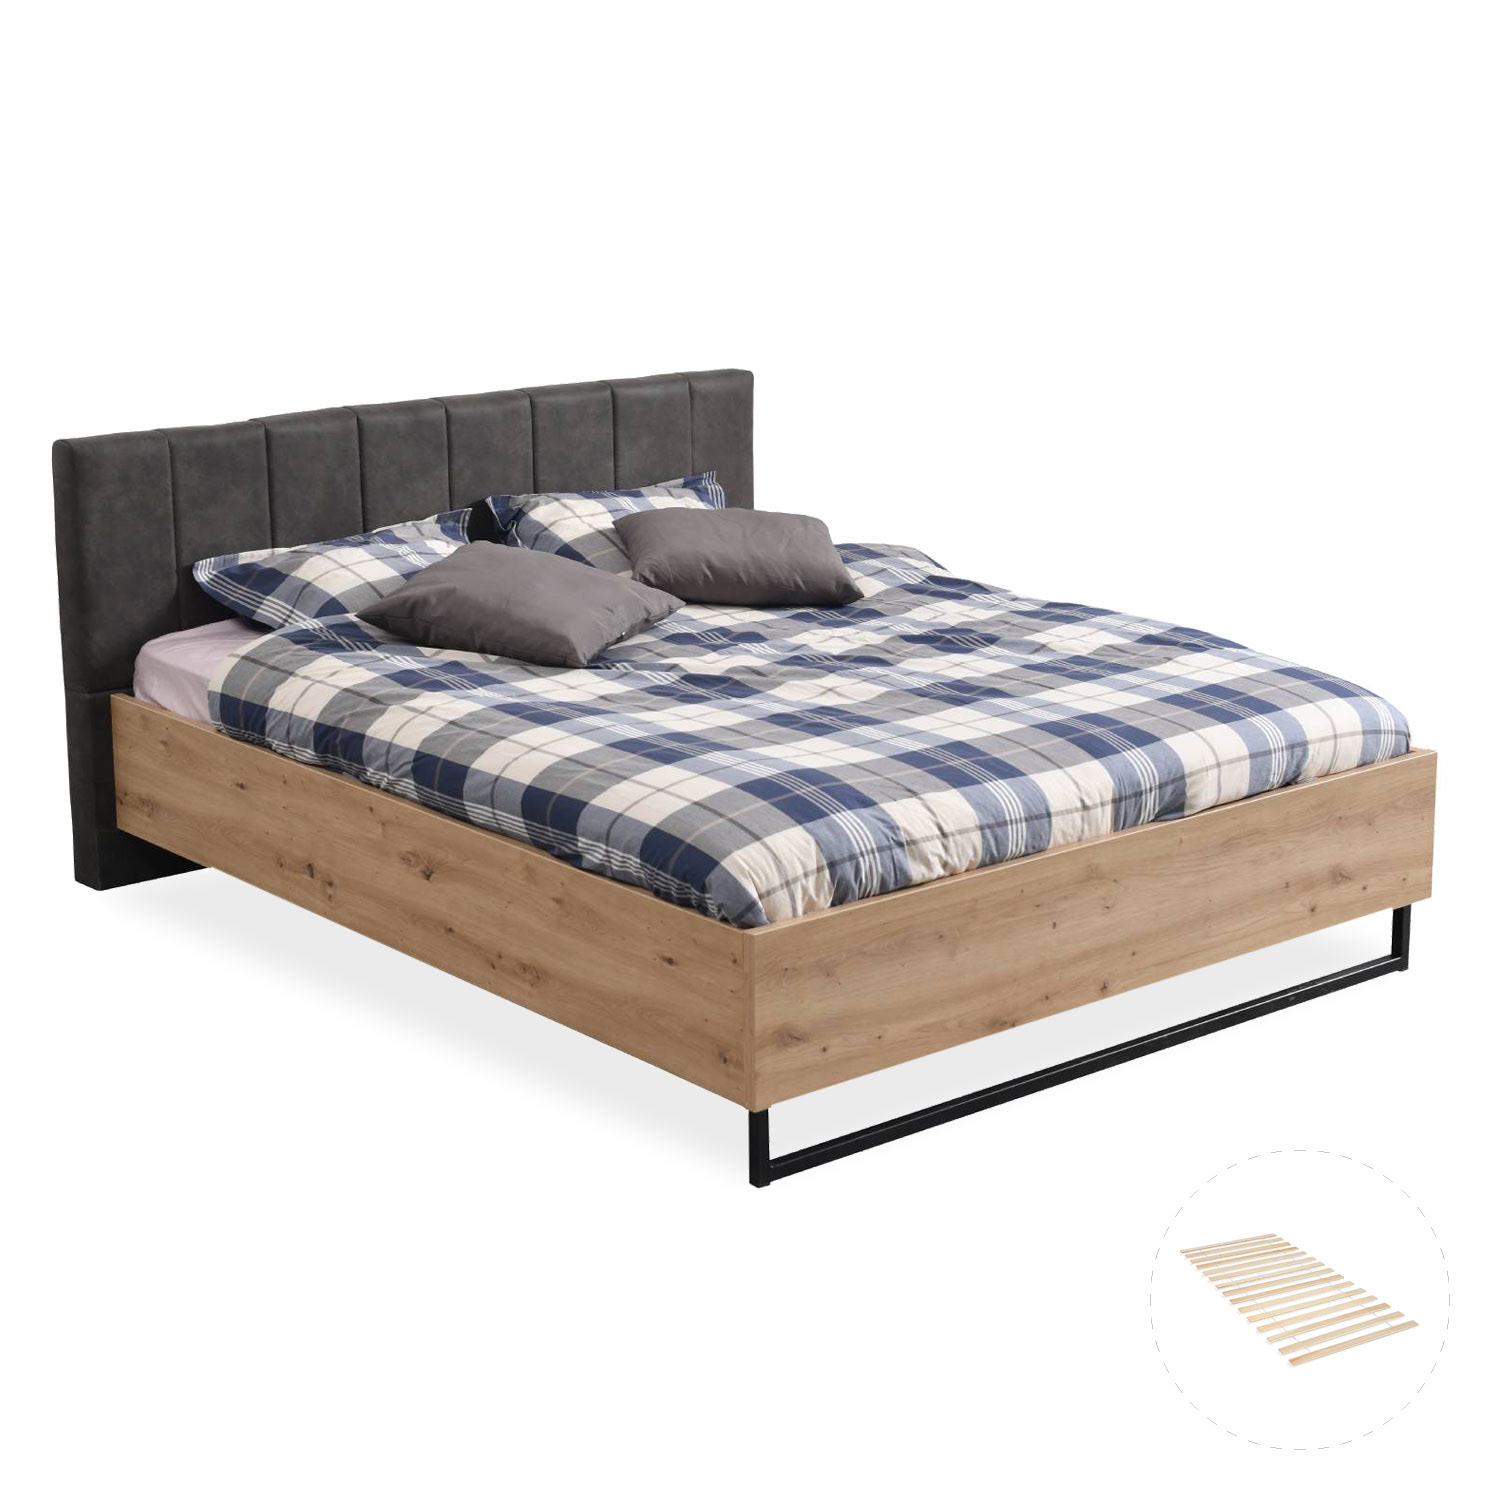 Double Bed Wooden Frame Upholstered Bed 160x200 cm with Slats Grey Fabric Oak Industrial Style